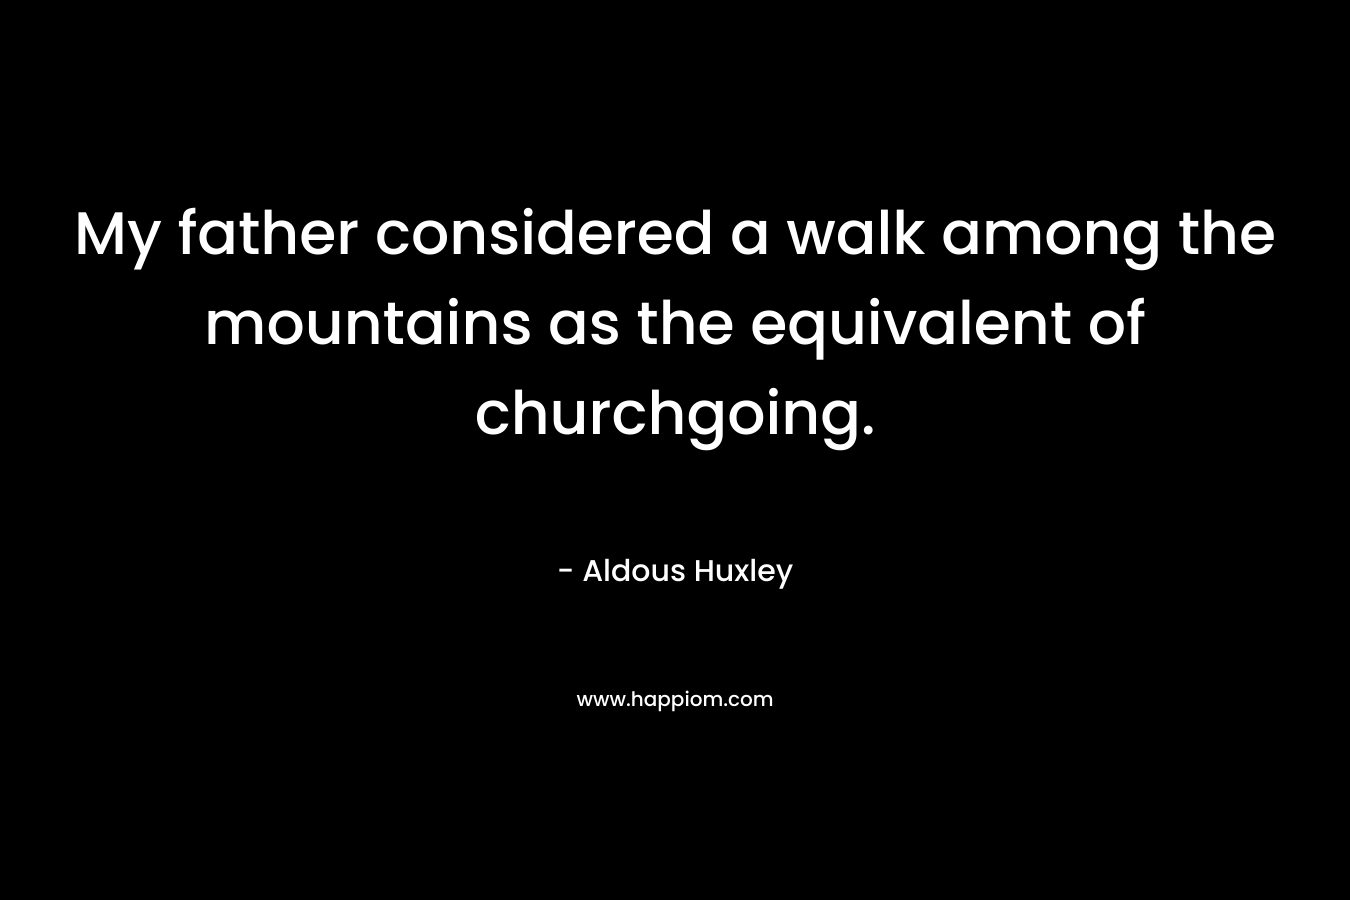 My father considered a walk among the mountains as the equivalent of churchgoing.